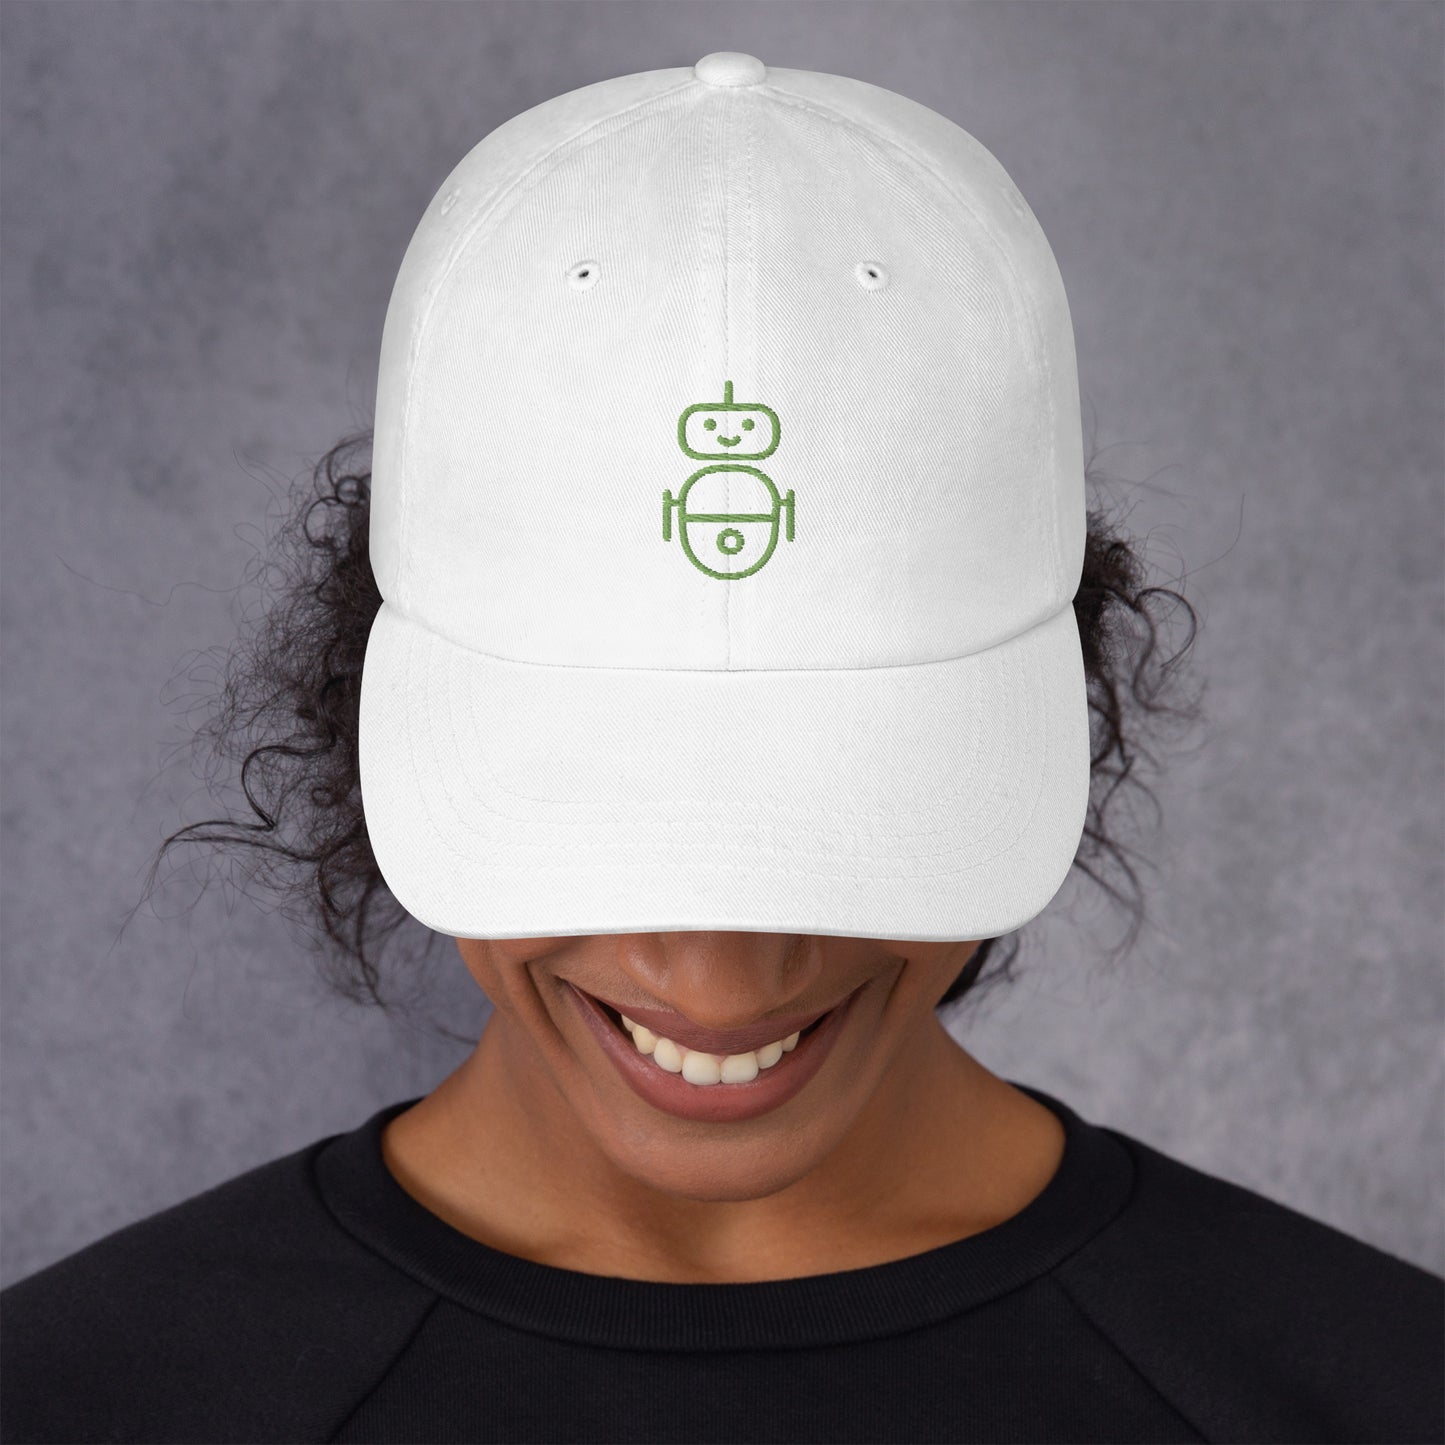 Women with white hat with in green Android logo